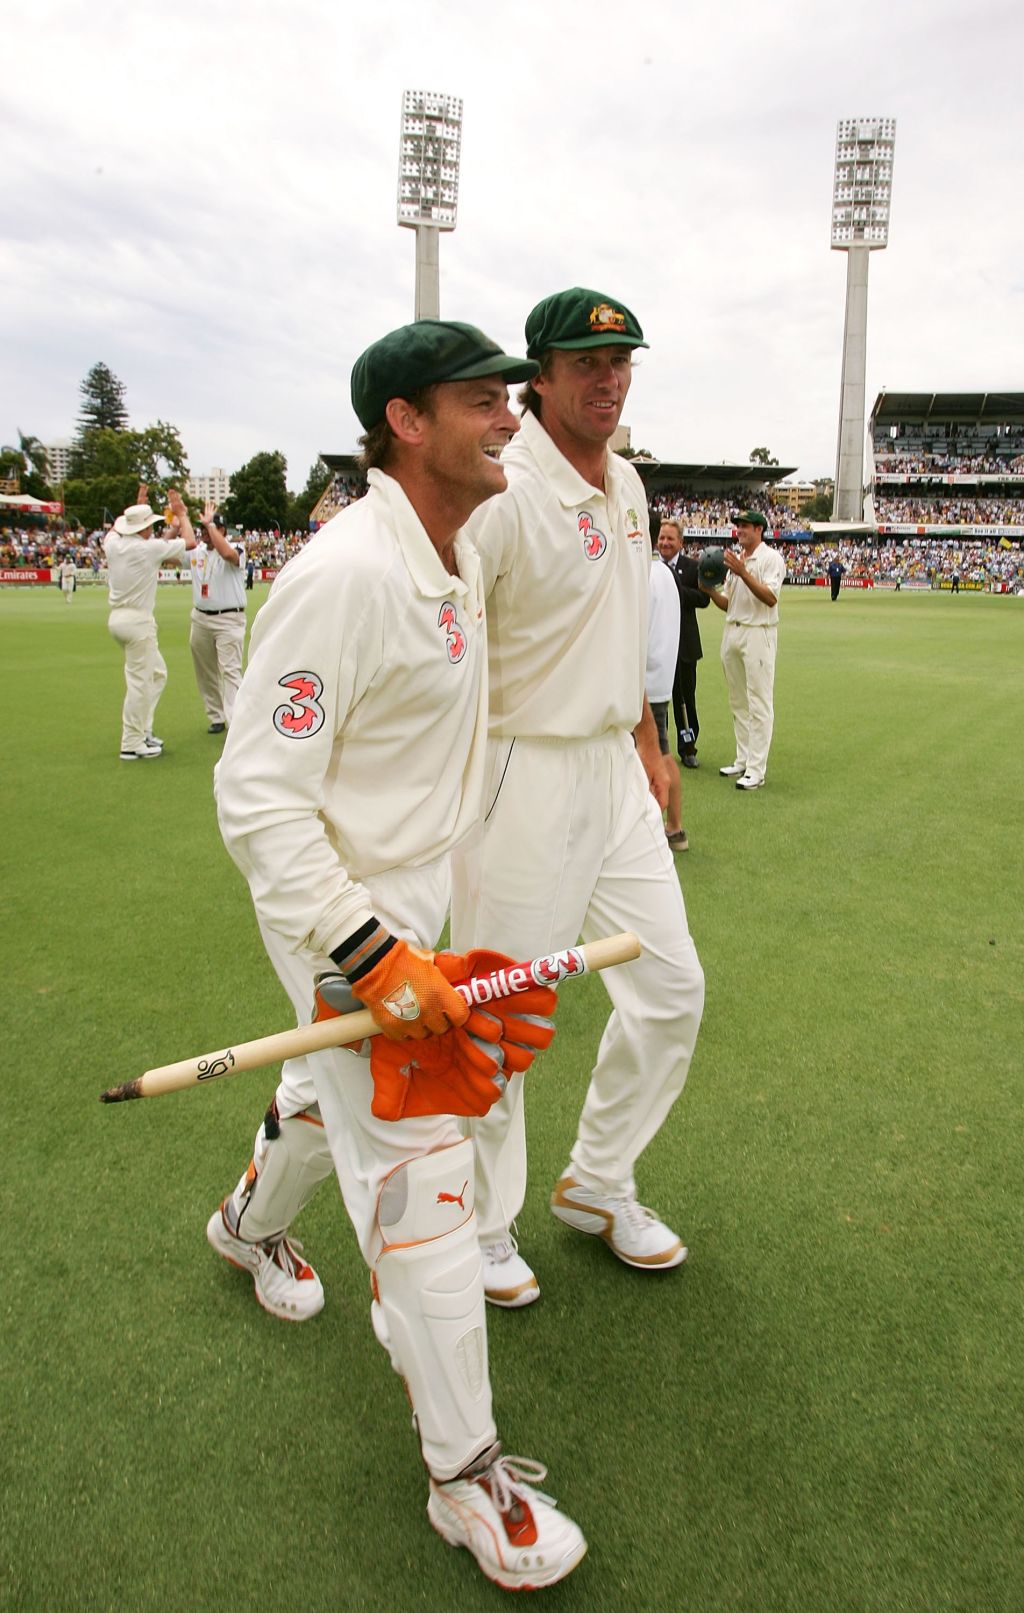 Adam Gilchrist after the third Ashes test in 2006, playing in his hometown of Perth and making history with a 57-ball century. Photo: Hamish Blair/Getty Images